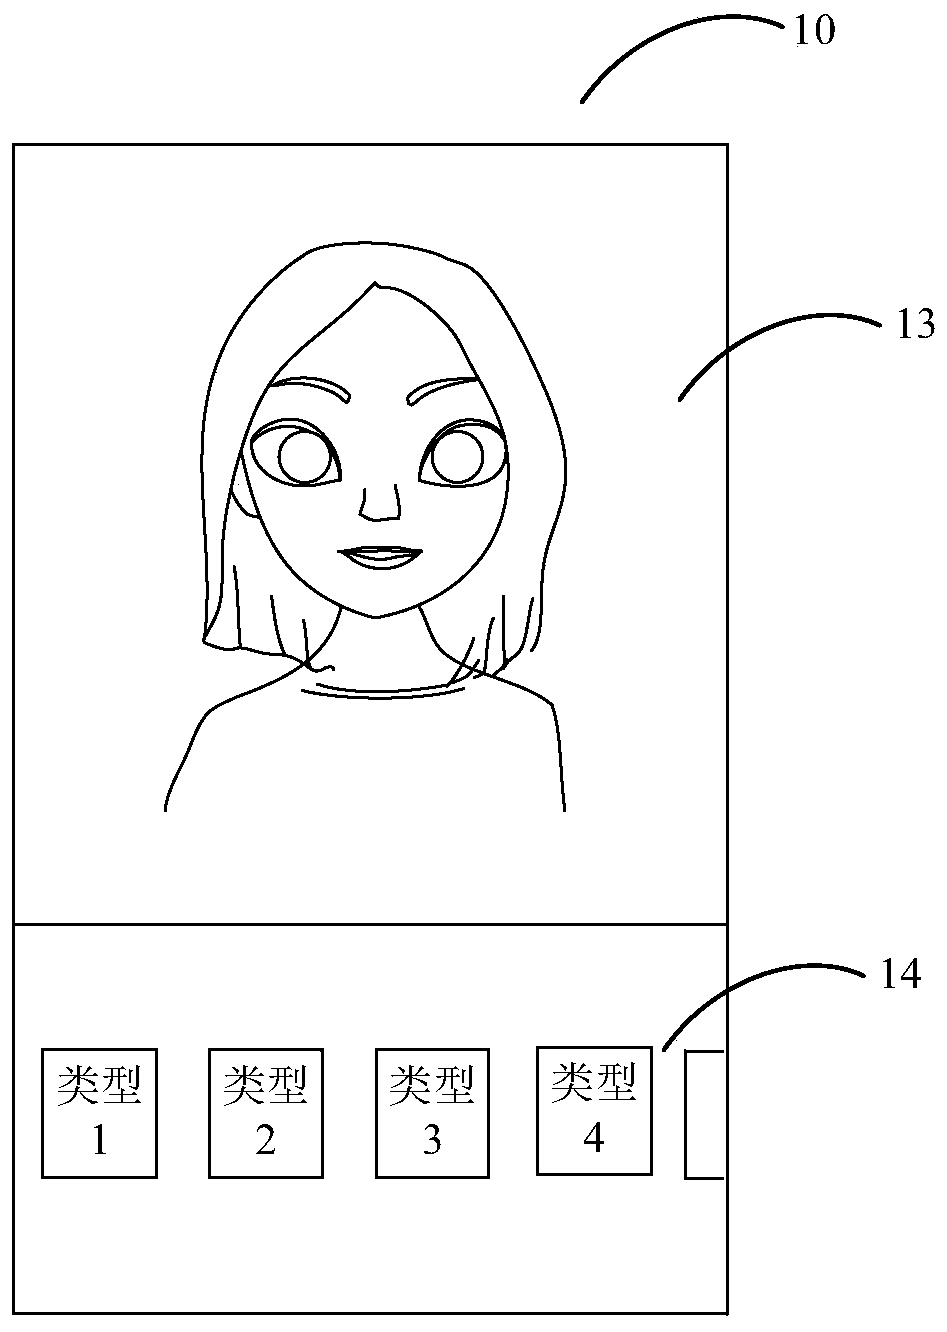 Live broadcast interaction method and device, electronic equipment and storage medium